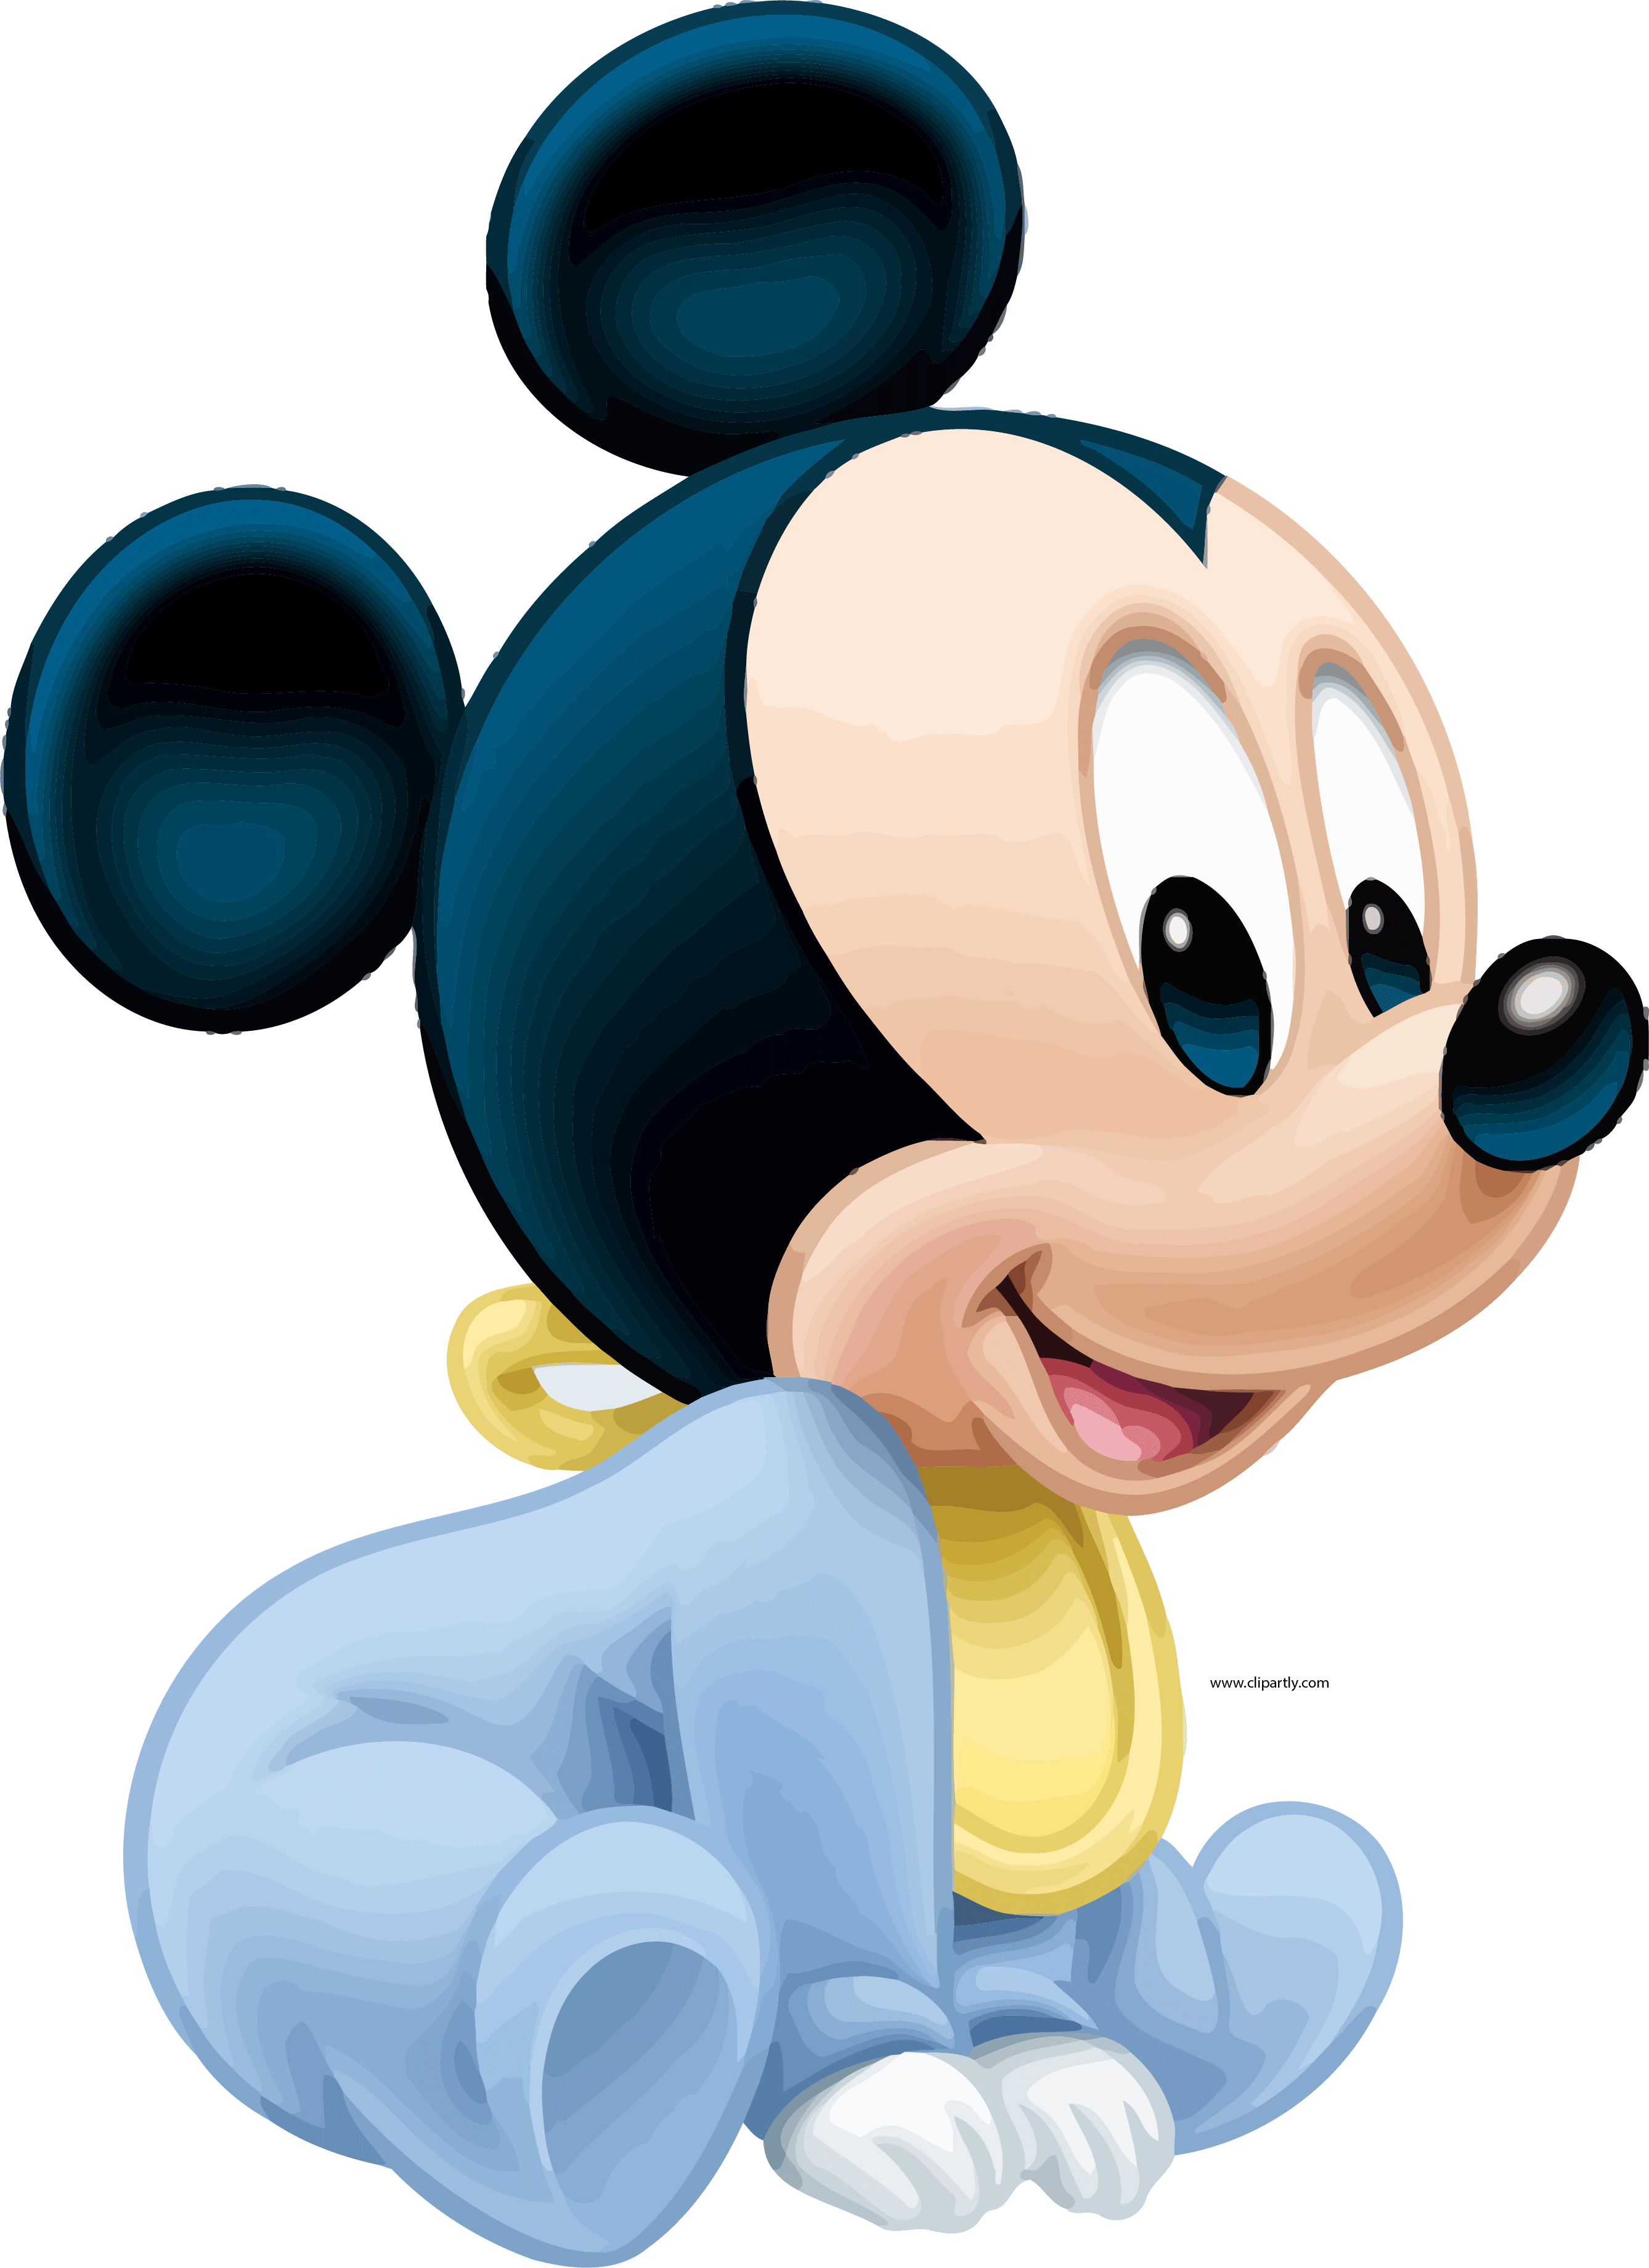 Baby Mickey Mouse Hd Wallpapers Top Free Baby Mickey Mouse Hd Backgrounds Wallpaperaccess